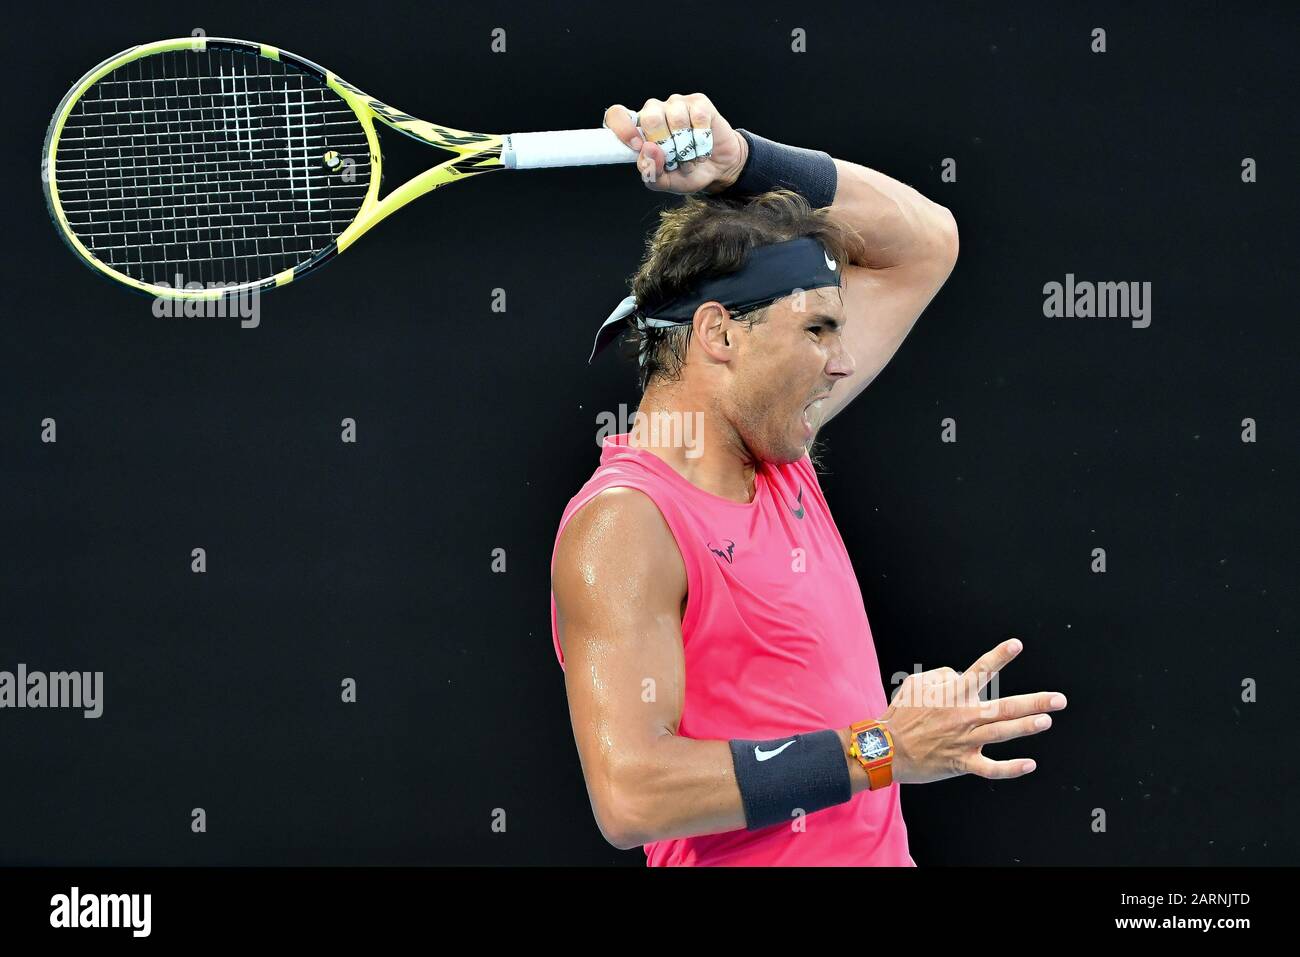 Melbourne, Australia. 29th Jan, 2020. 1st seed RAFAEL NADAL (ESP) in action against 5th seed DOMINIC THIEM (AUT) on Rod Laver Arena in a Men's Singles Quarterfinals match on day 10 of the Australian Open 2020 in Melbourne, Australia. Sydney Low/Cal Sport Media/Alamy Live News Stock Photo